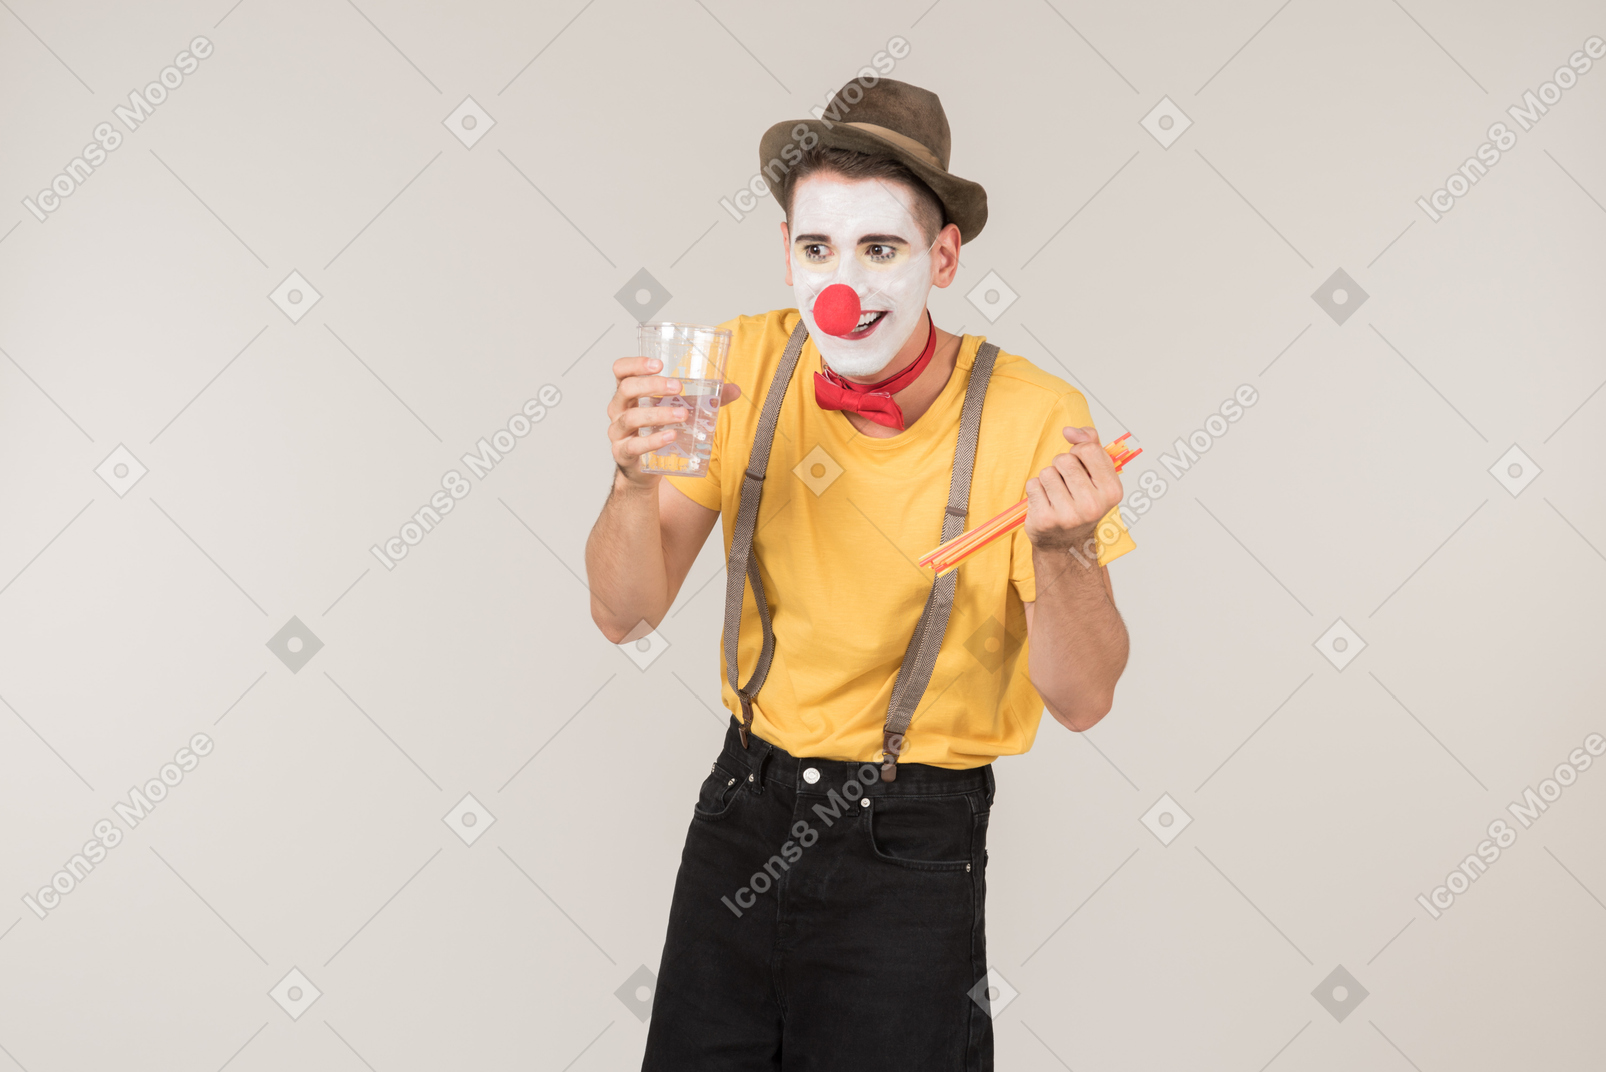 Male clown holding glass and straws